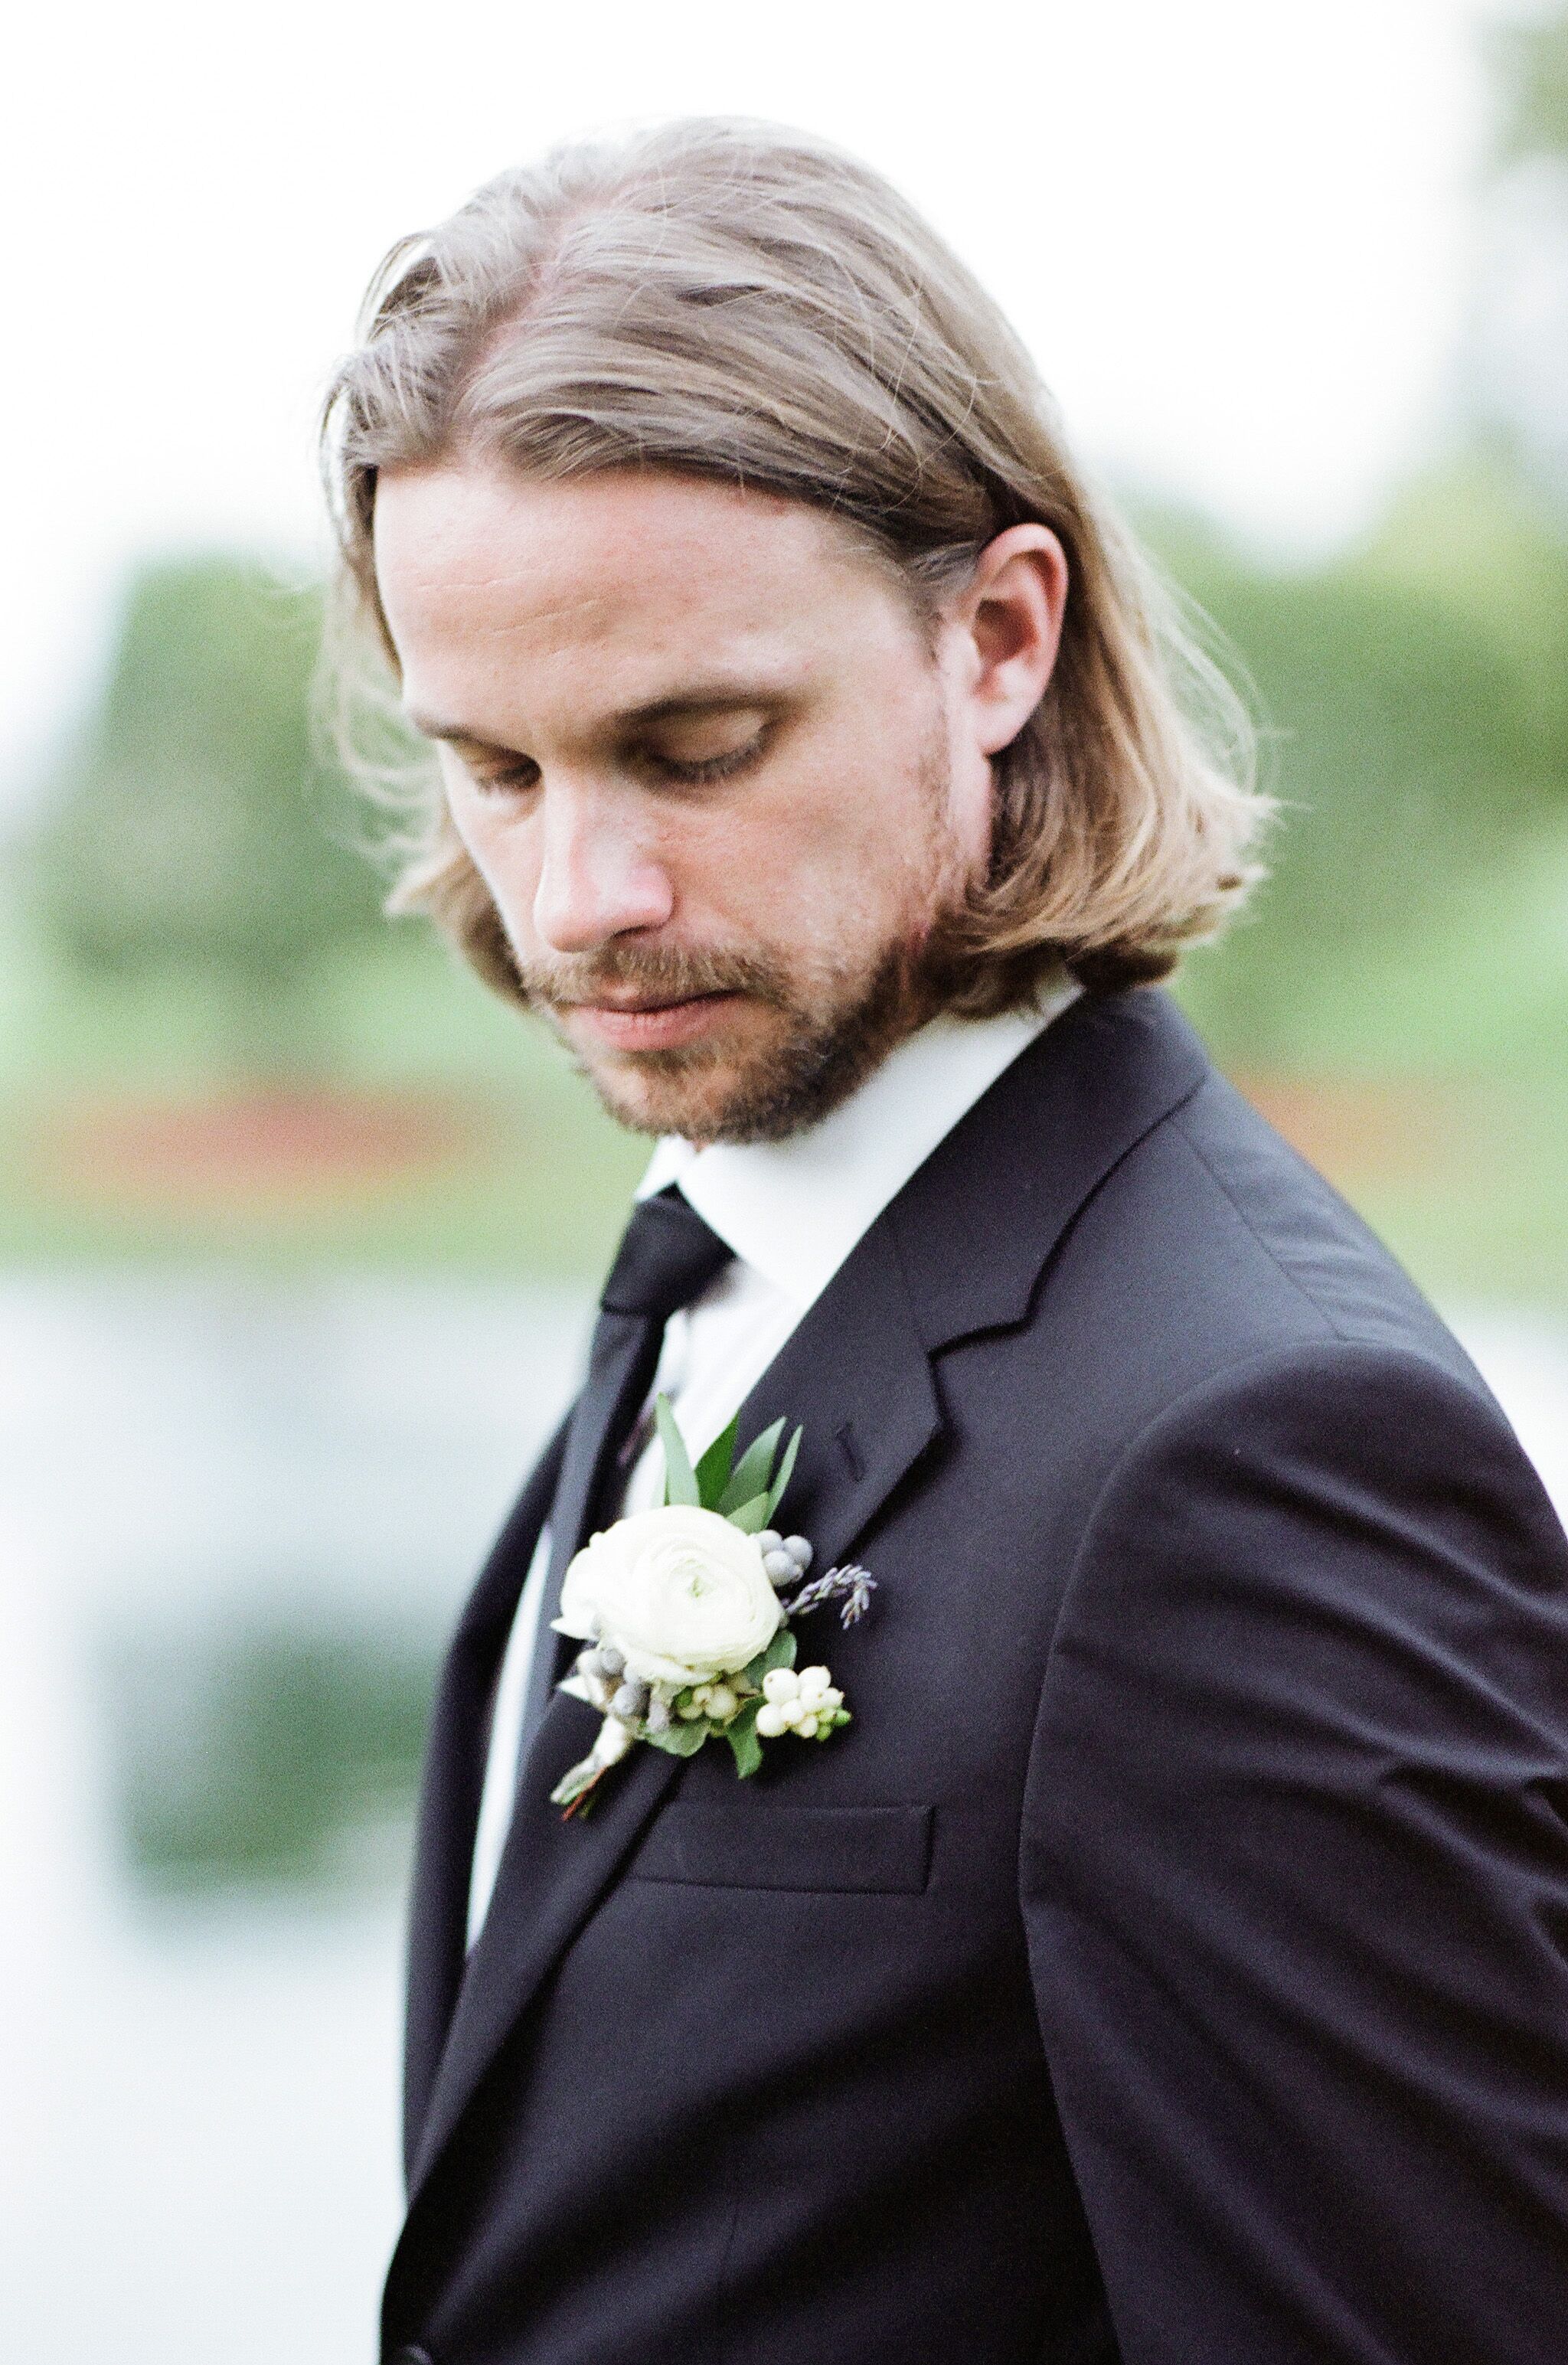 Classic Black Prada Suit with White Boutonniere